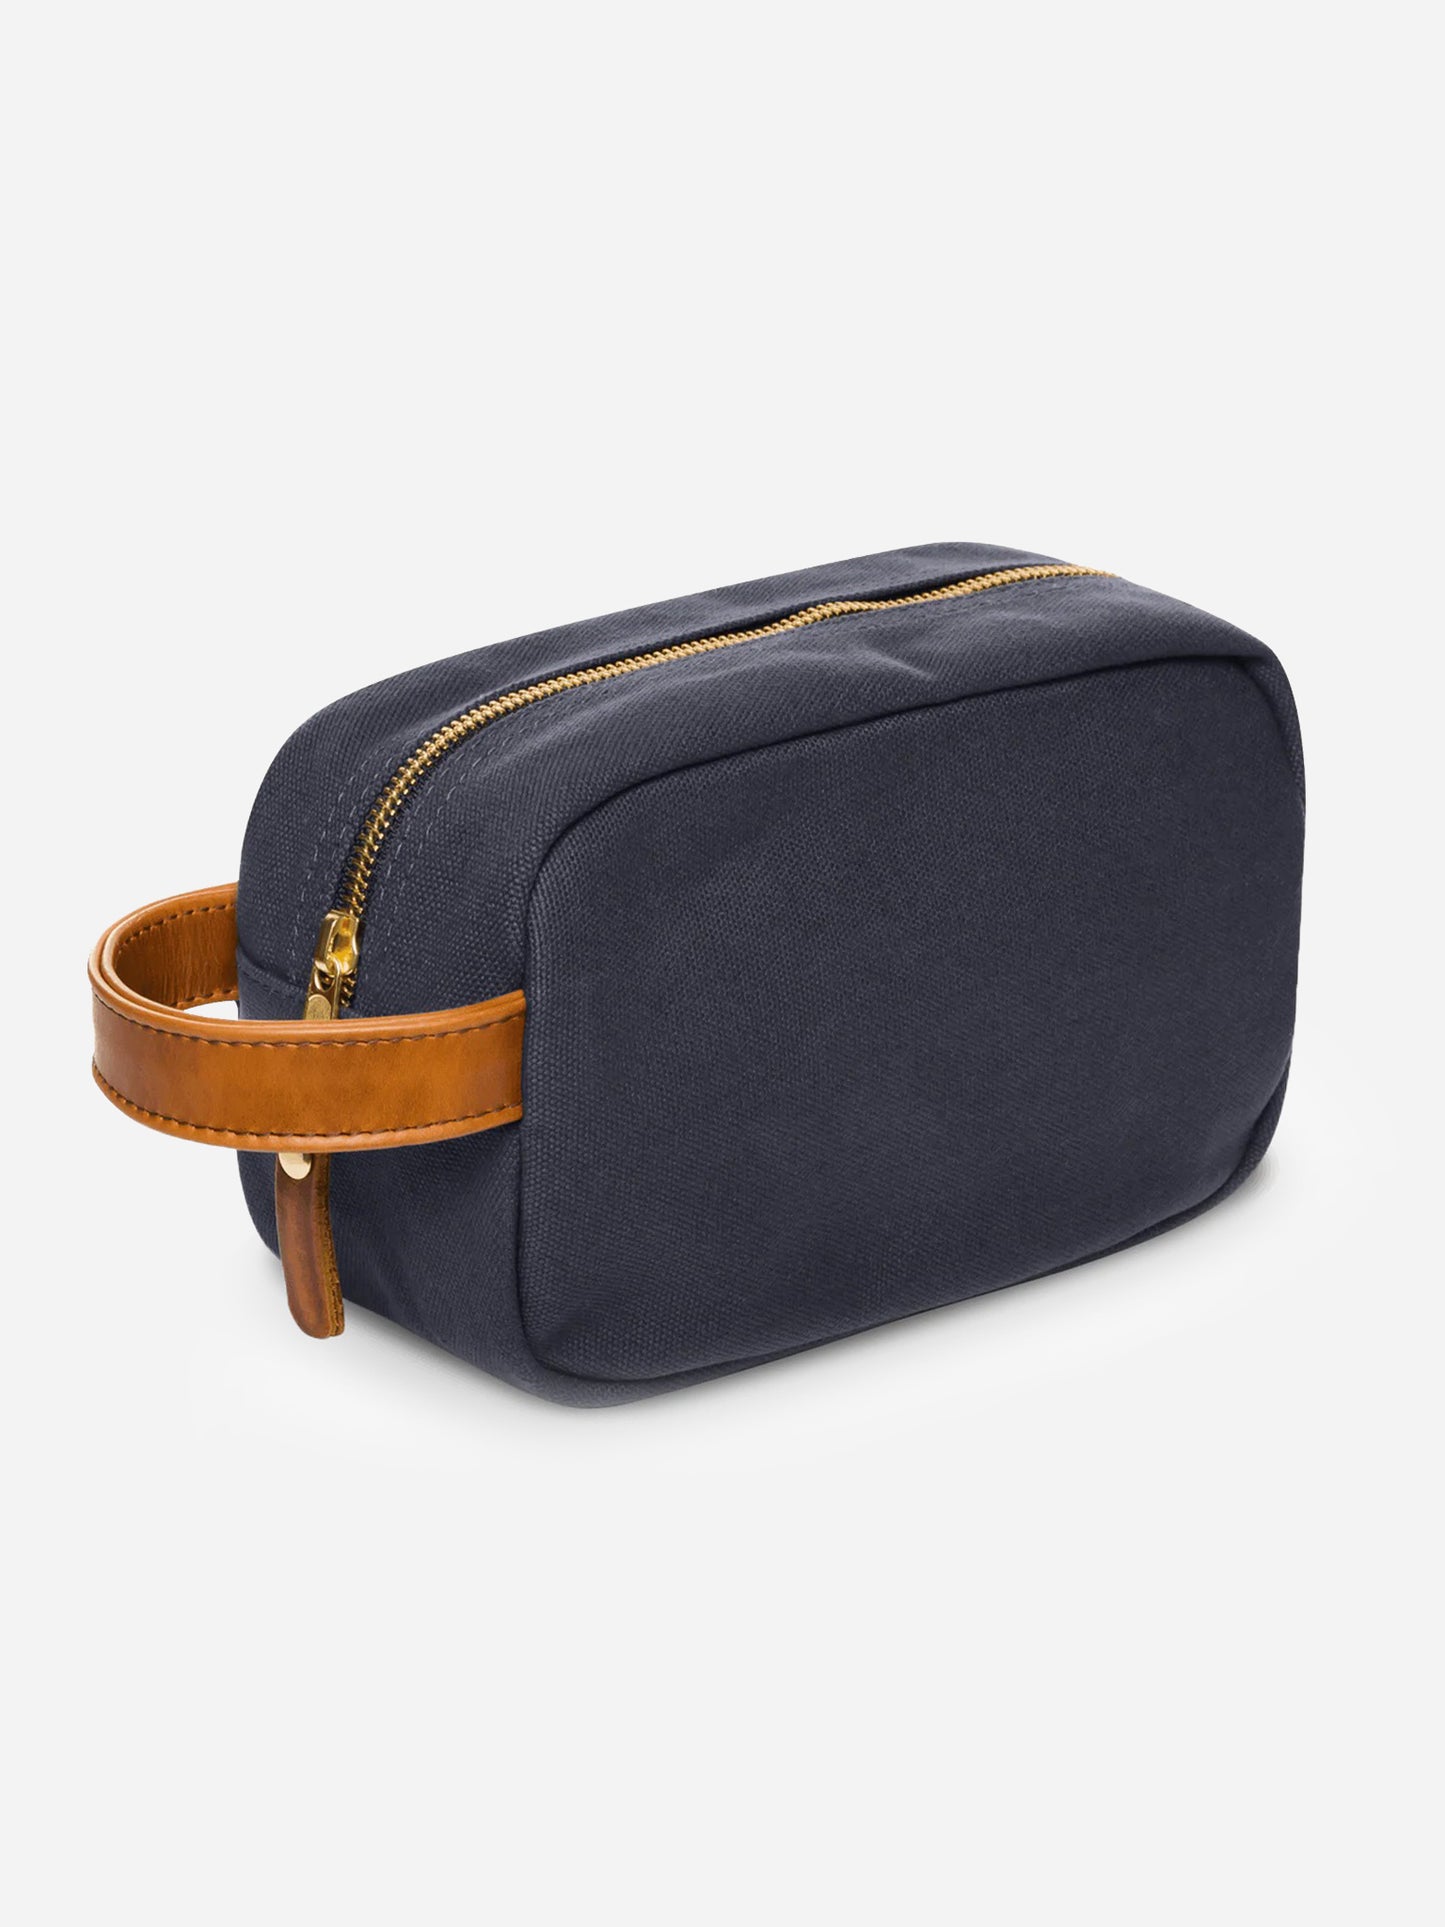 Hudson Sutler Canvas And Leather Toiletry Bag